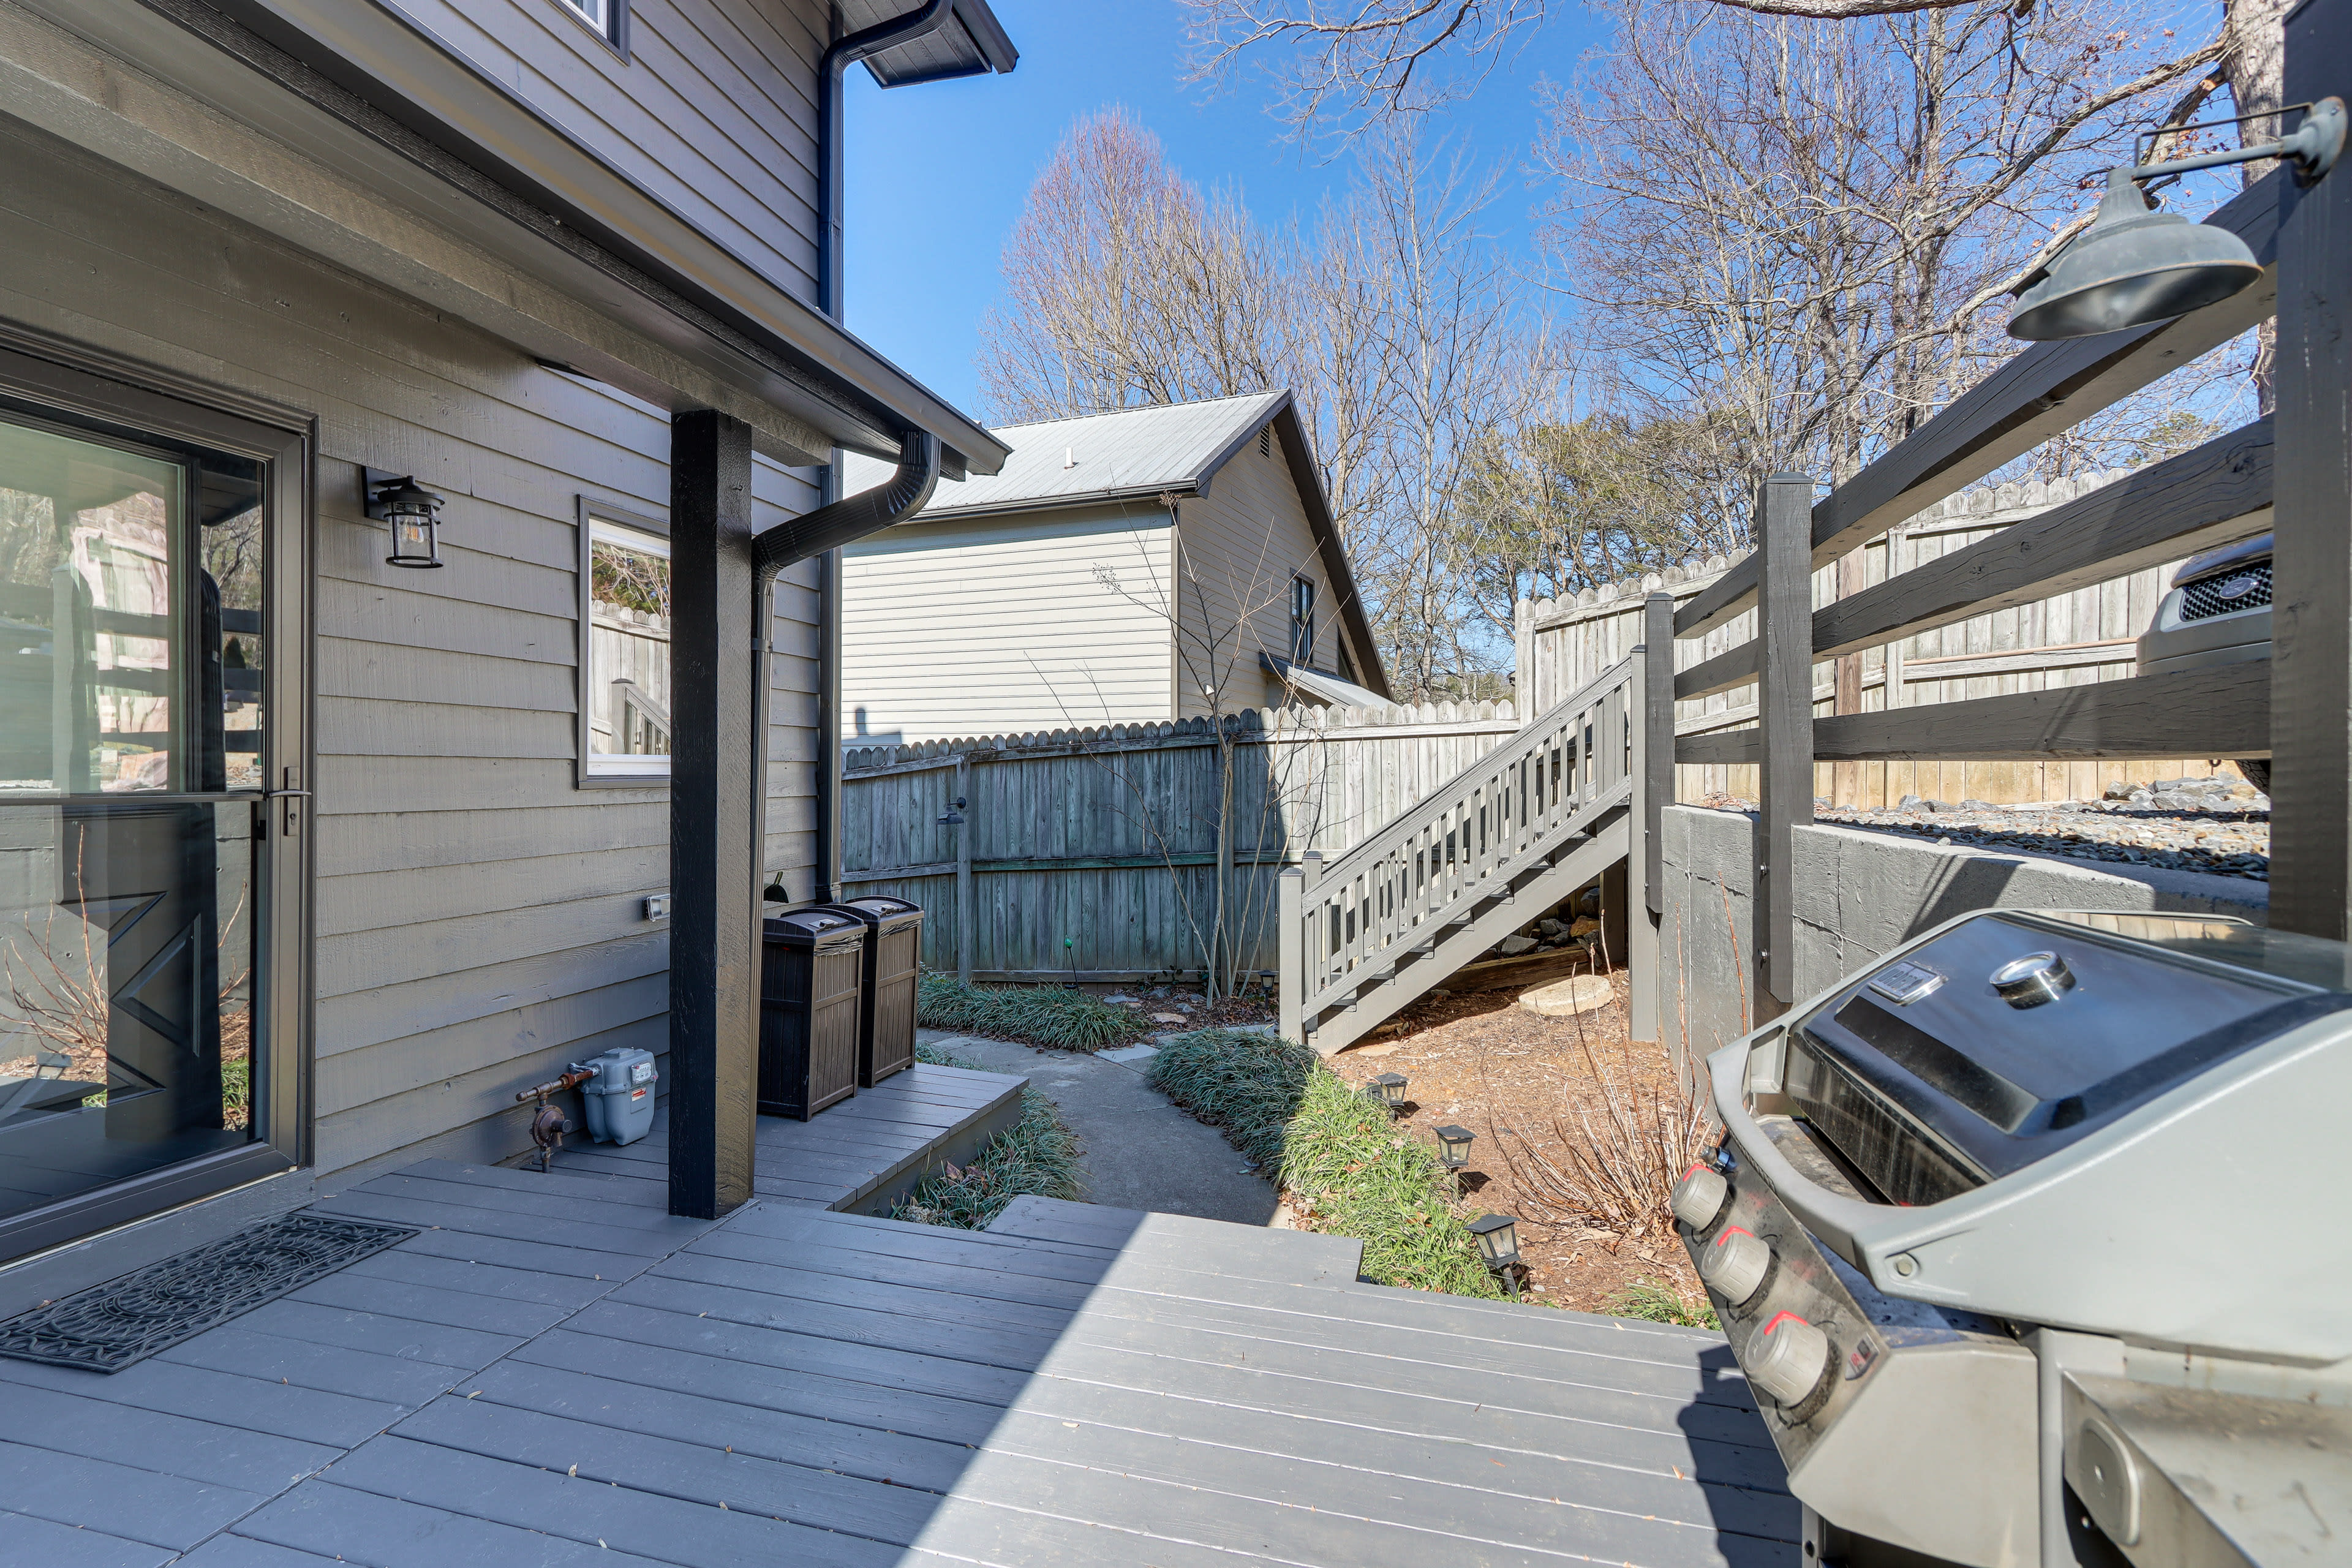 Townhome Exterior/Deck | Gas Grill